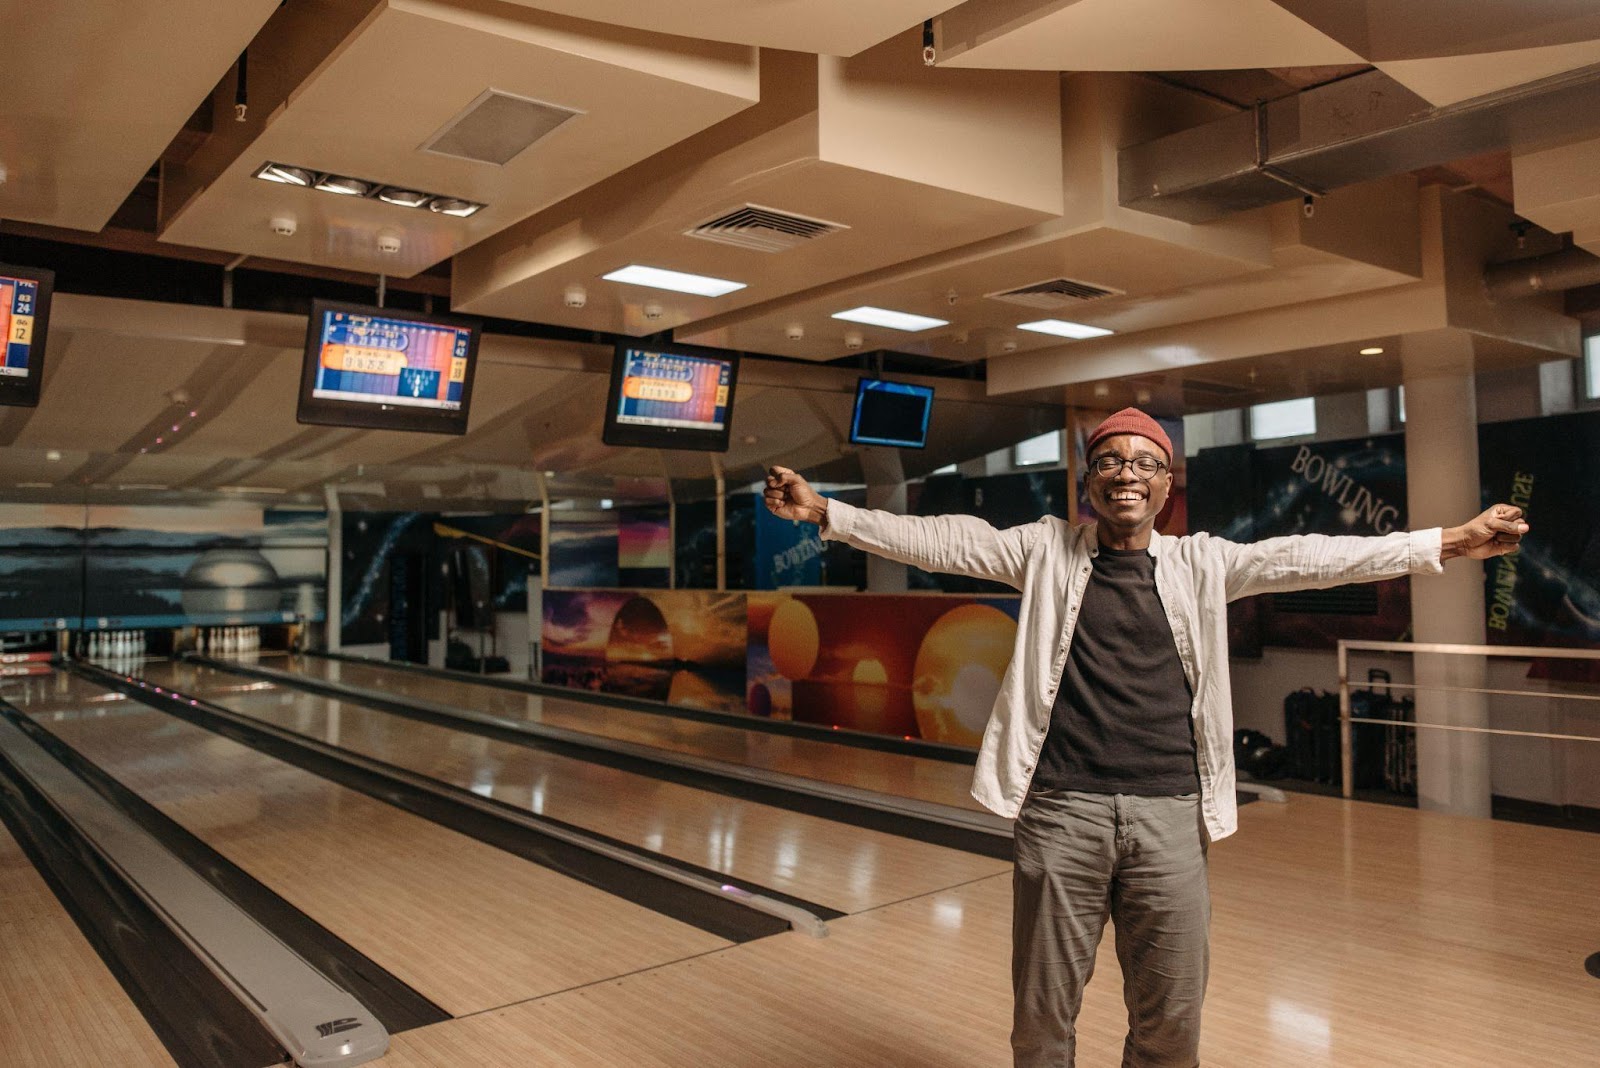 A man with outstretched arms and a big smile on his face in a bowling alley